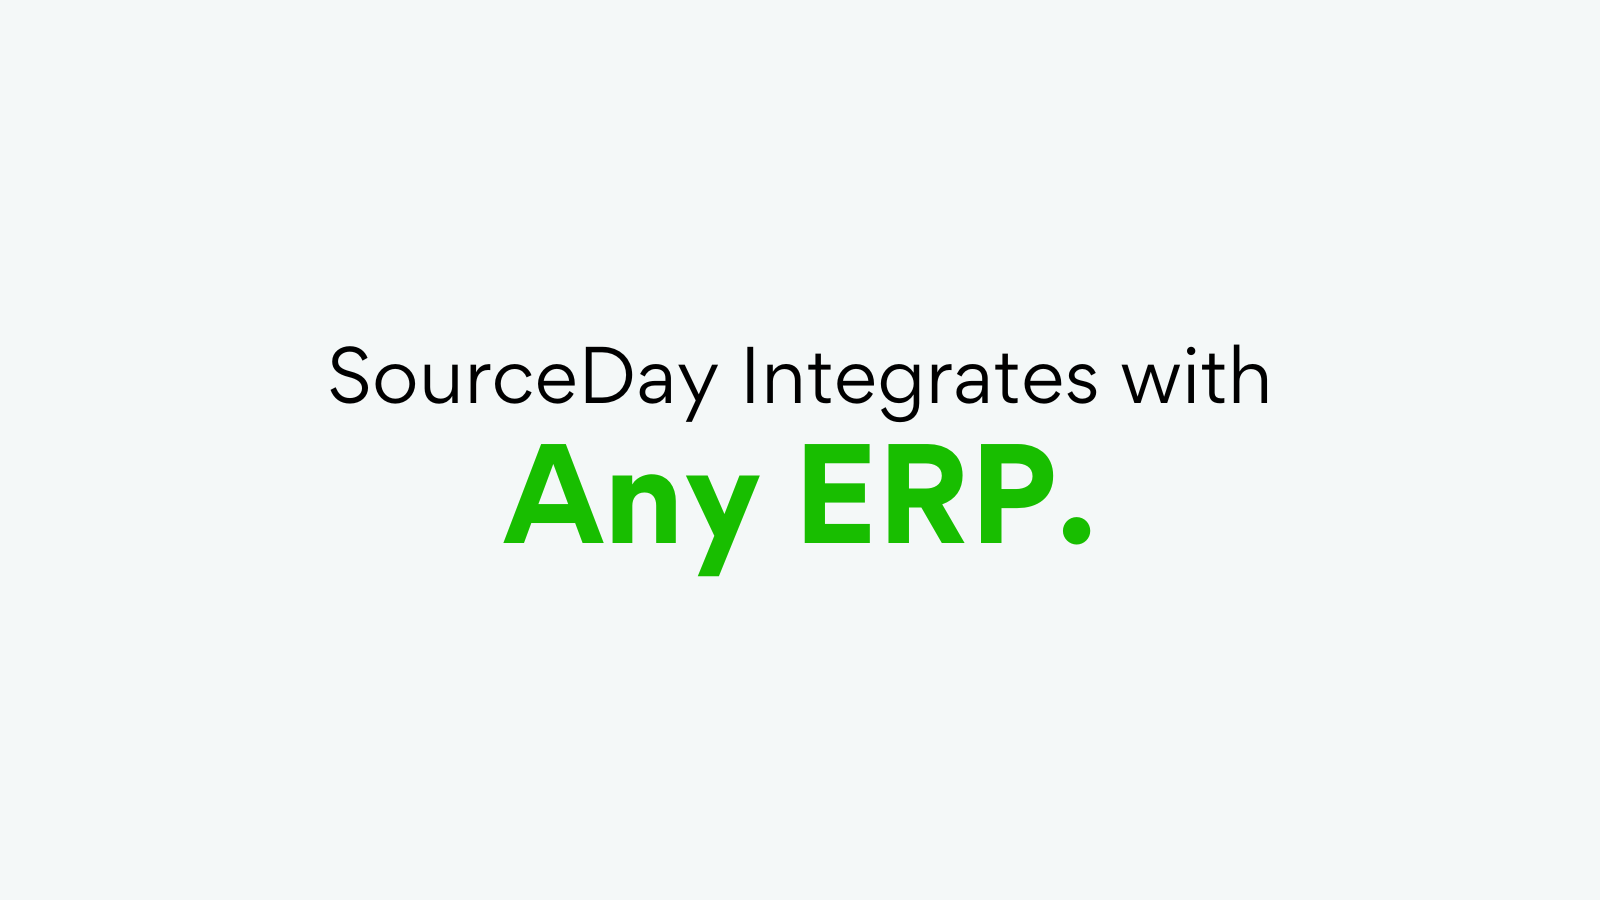 SourceDay for Any ERP logo.